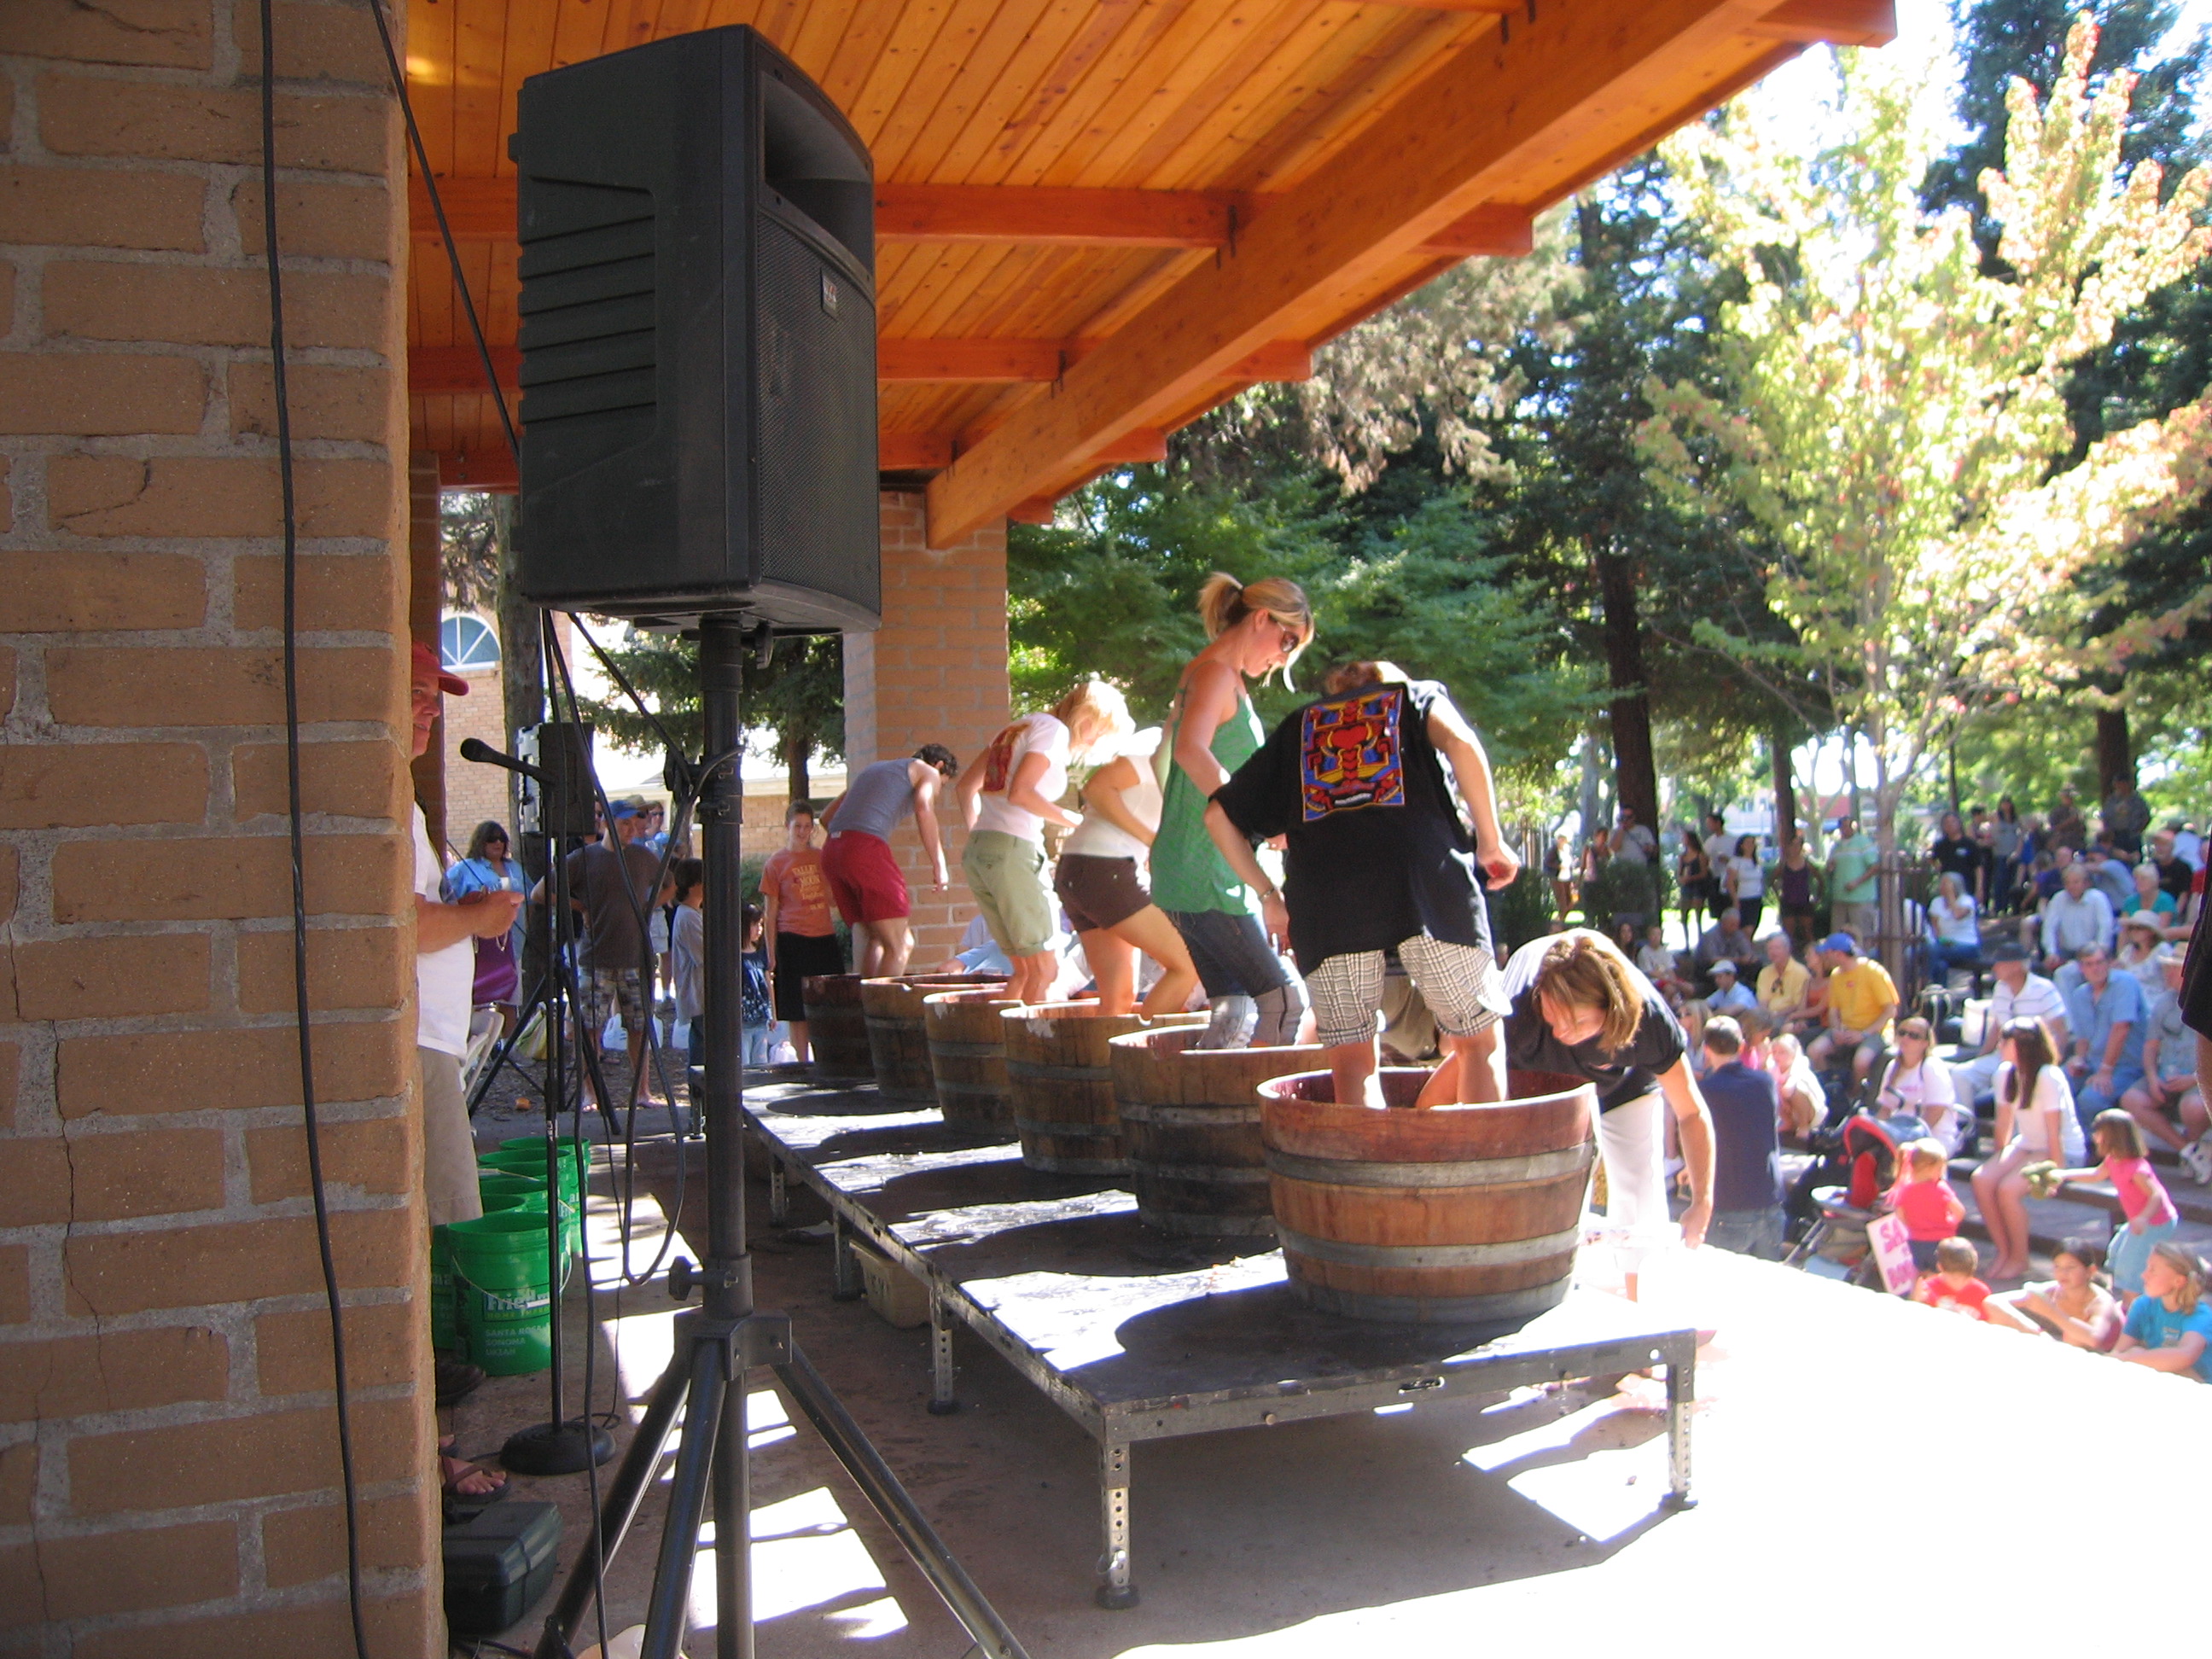 Stomping Grapes Onstage at The Vintage Festival by Kelley Eling, Marin County Realtor